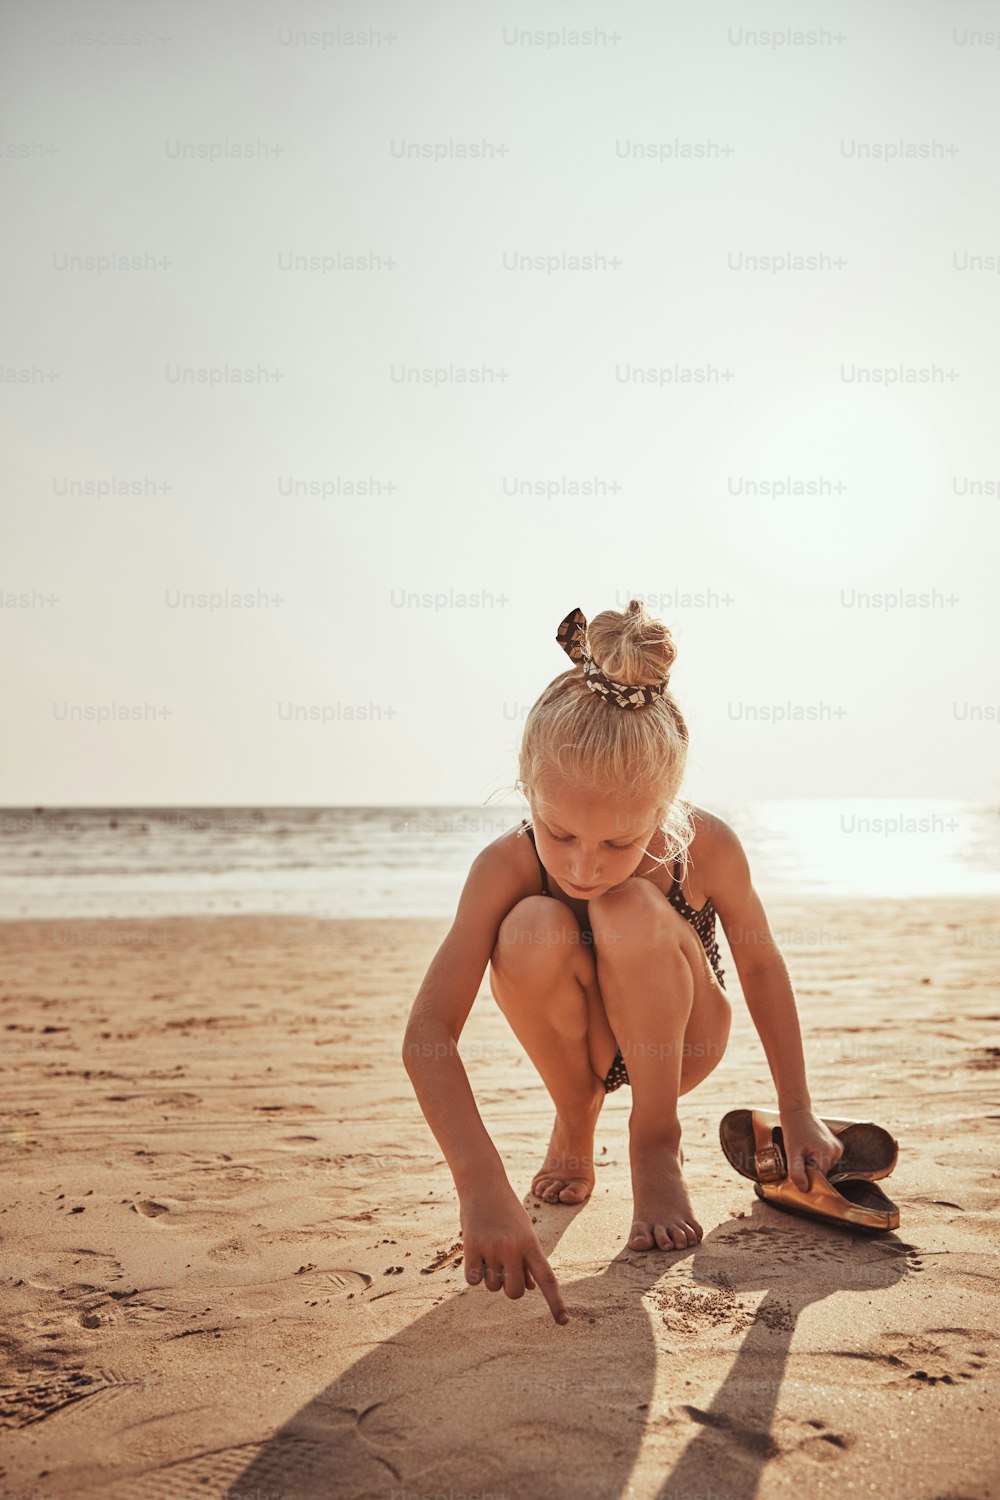 Little girl in green bathing suit plays in sand on beach, green